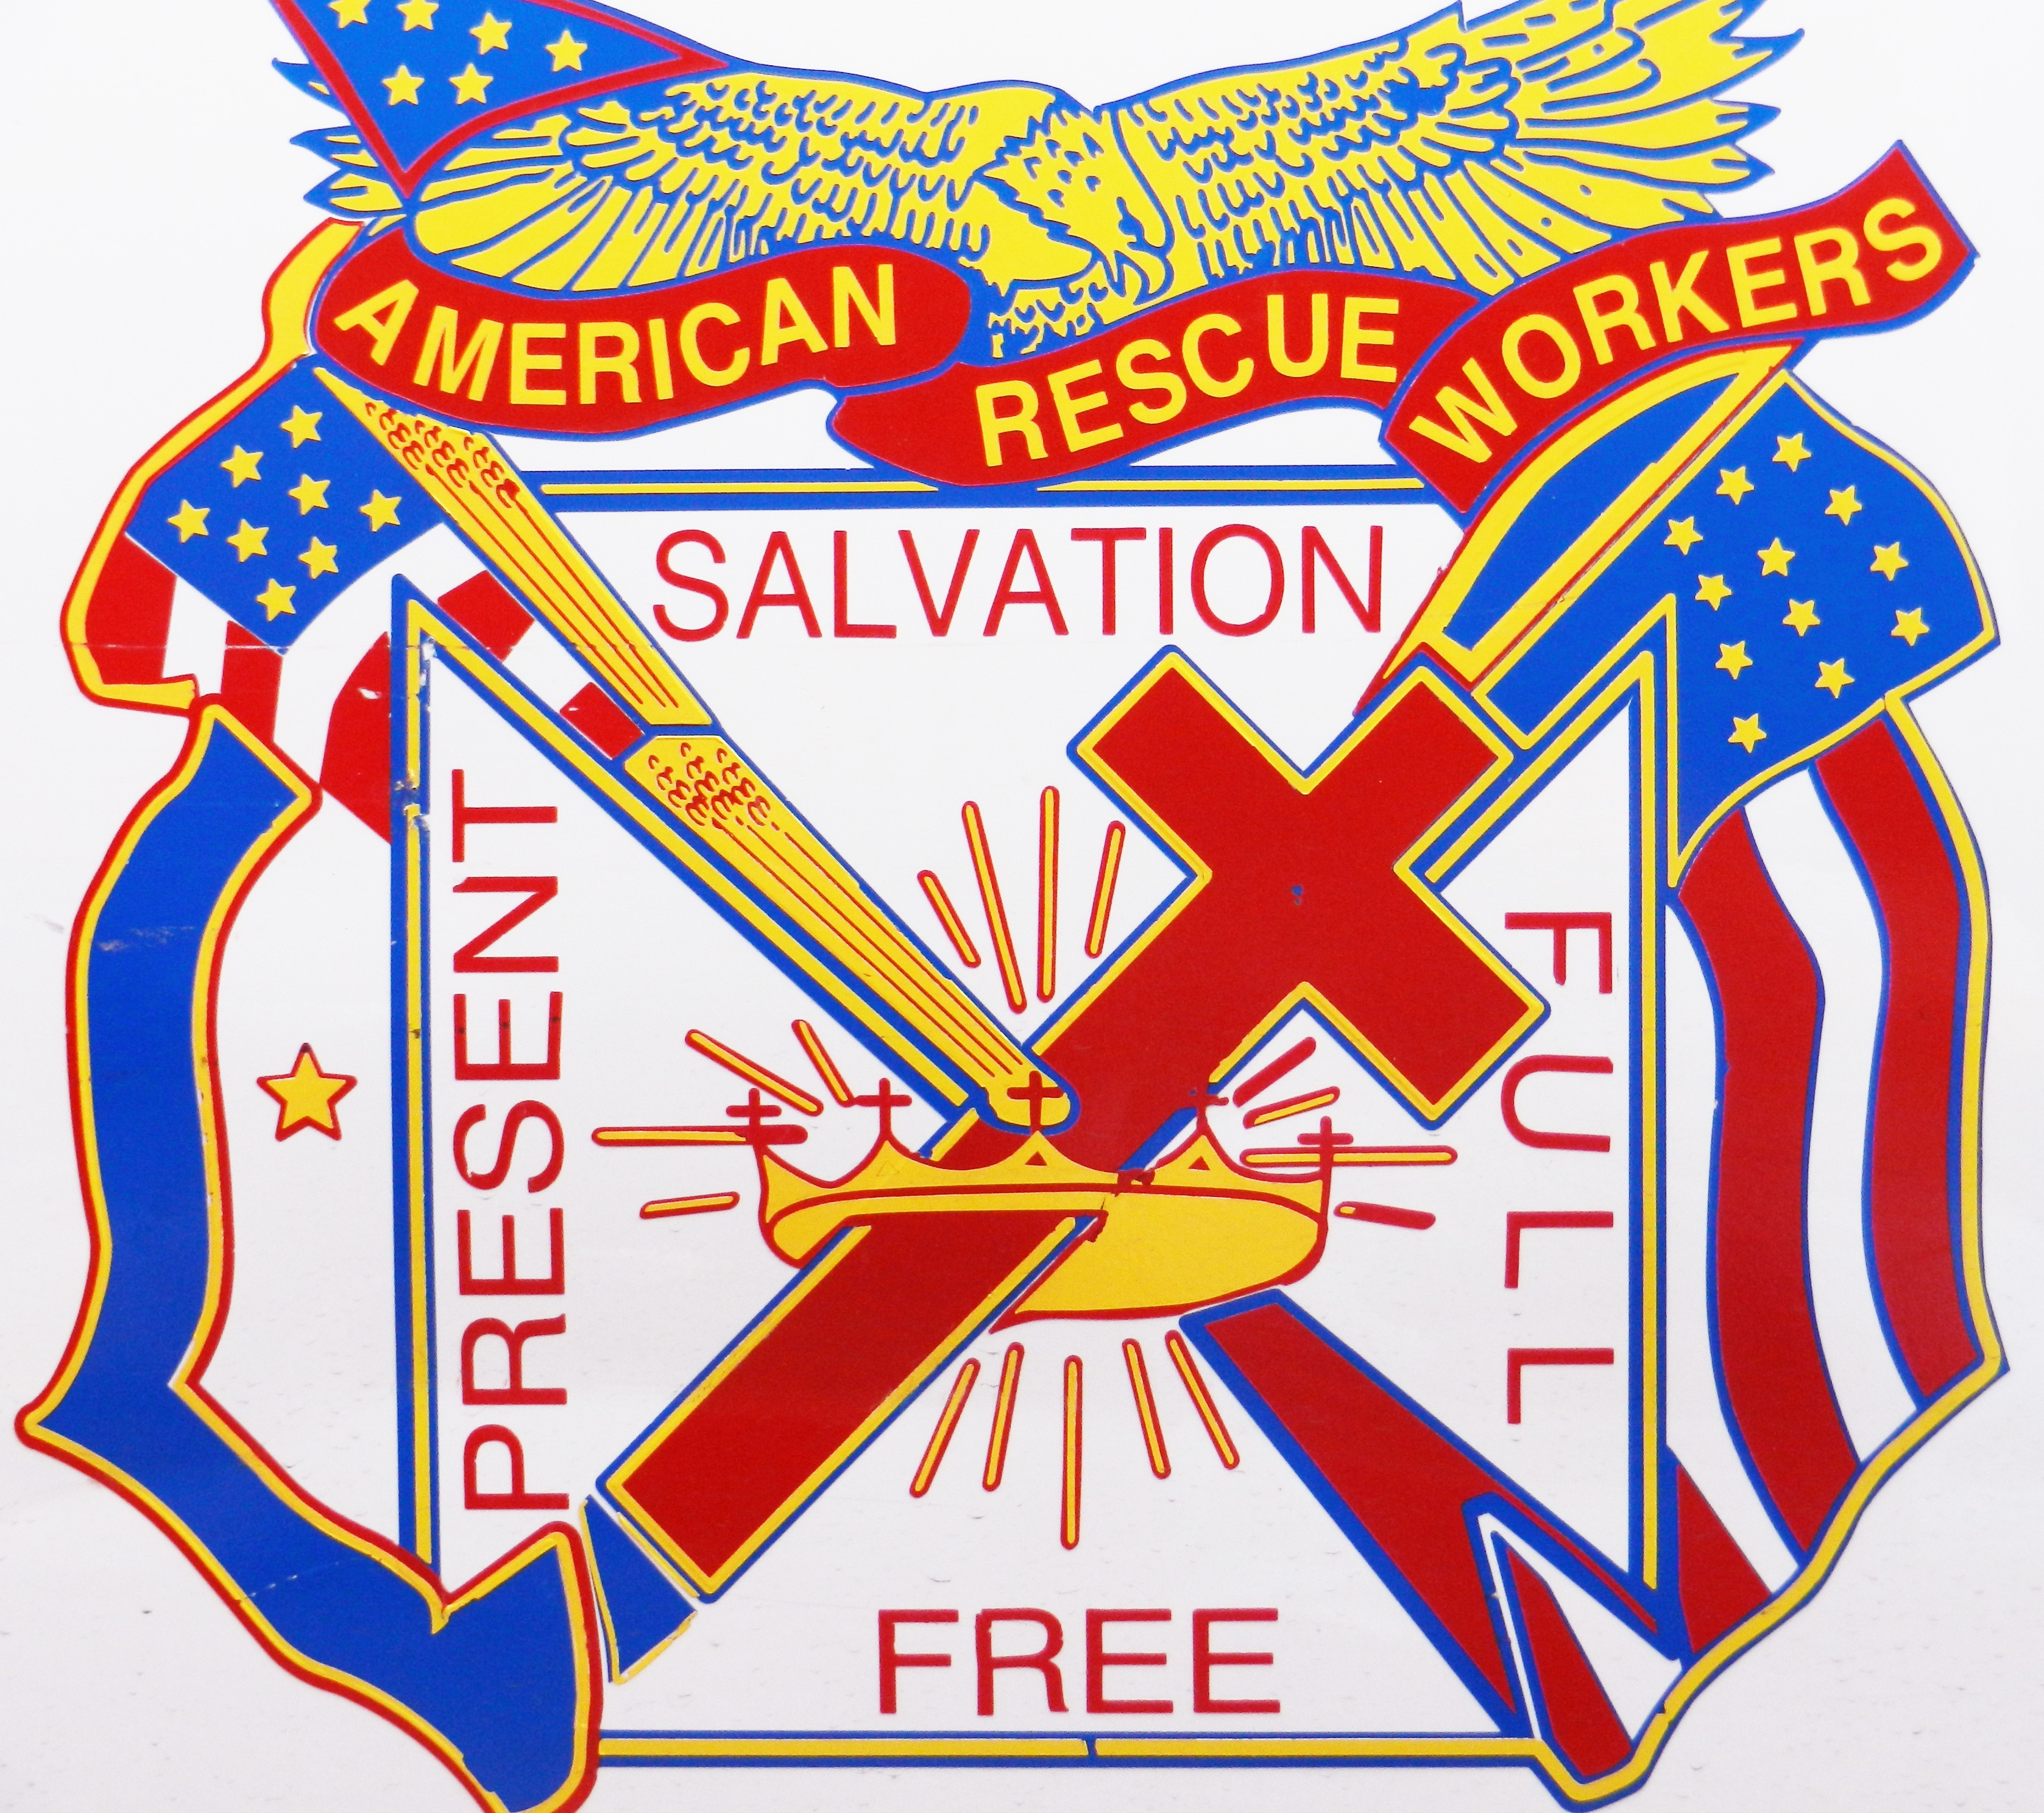 American Rescue Workers, Baltimore